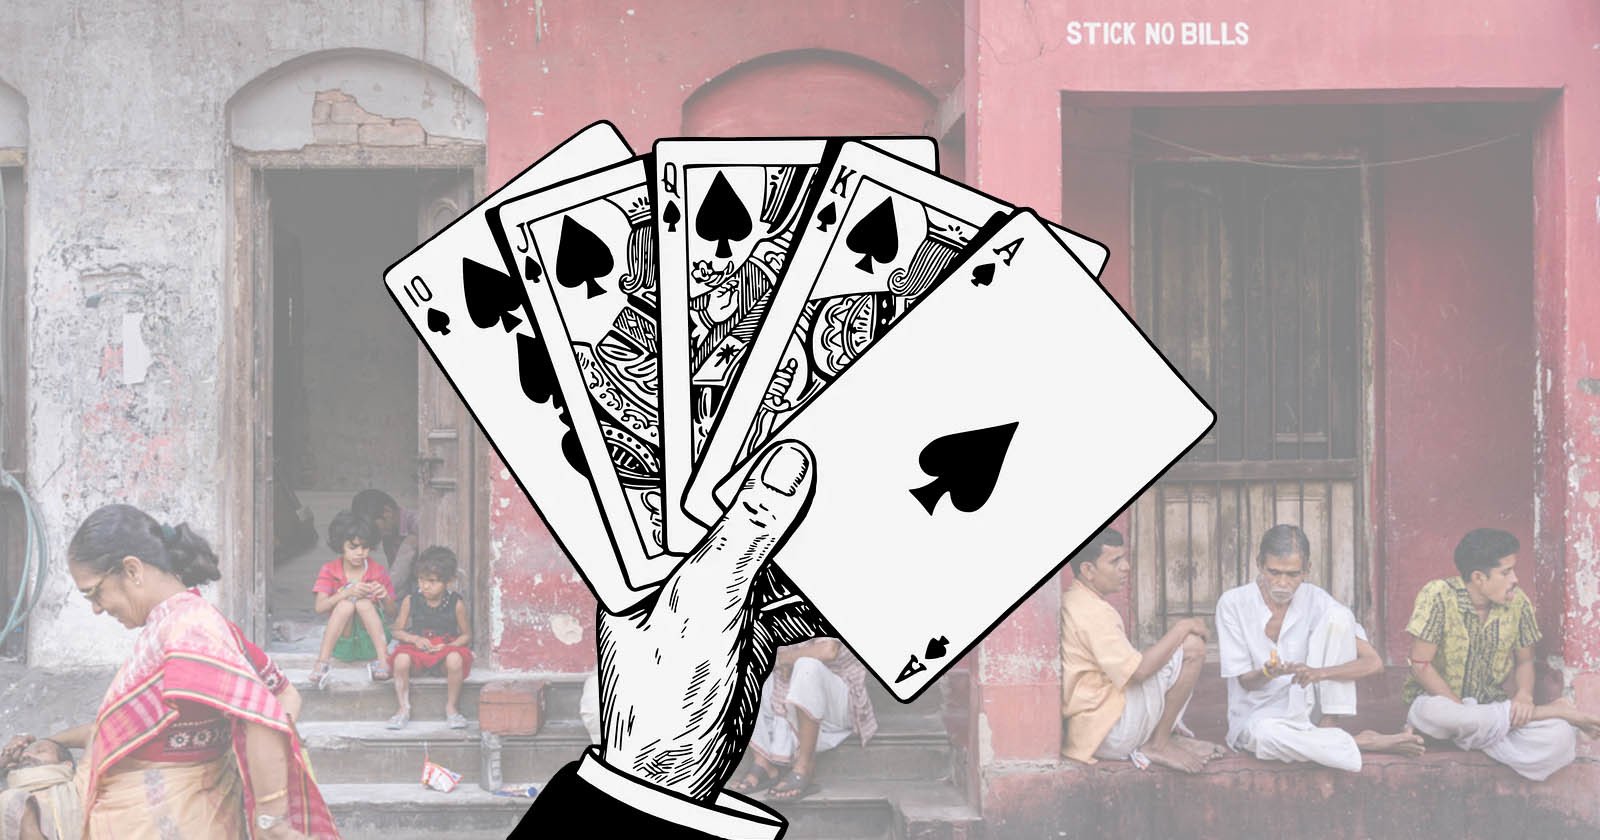 A Poker Hand Ranking of Street Photo Compositions